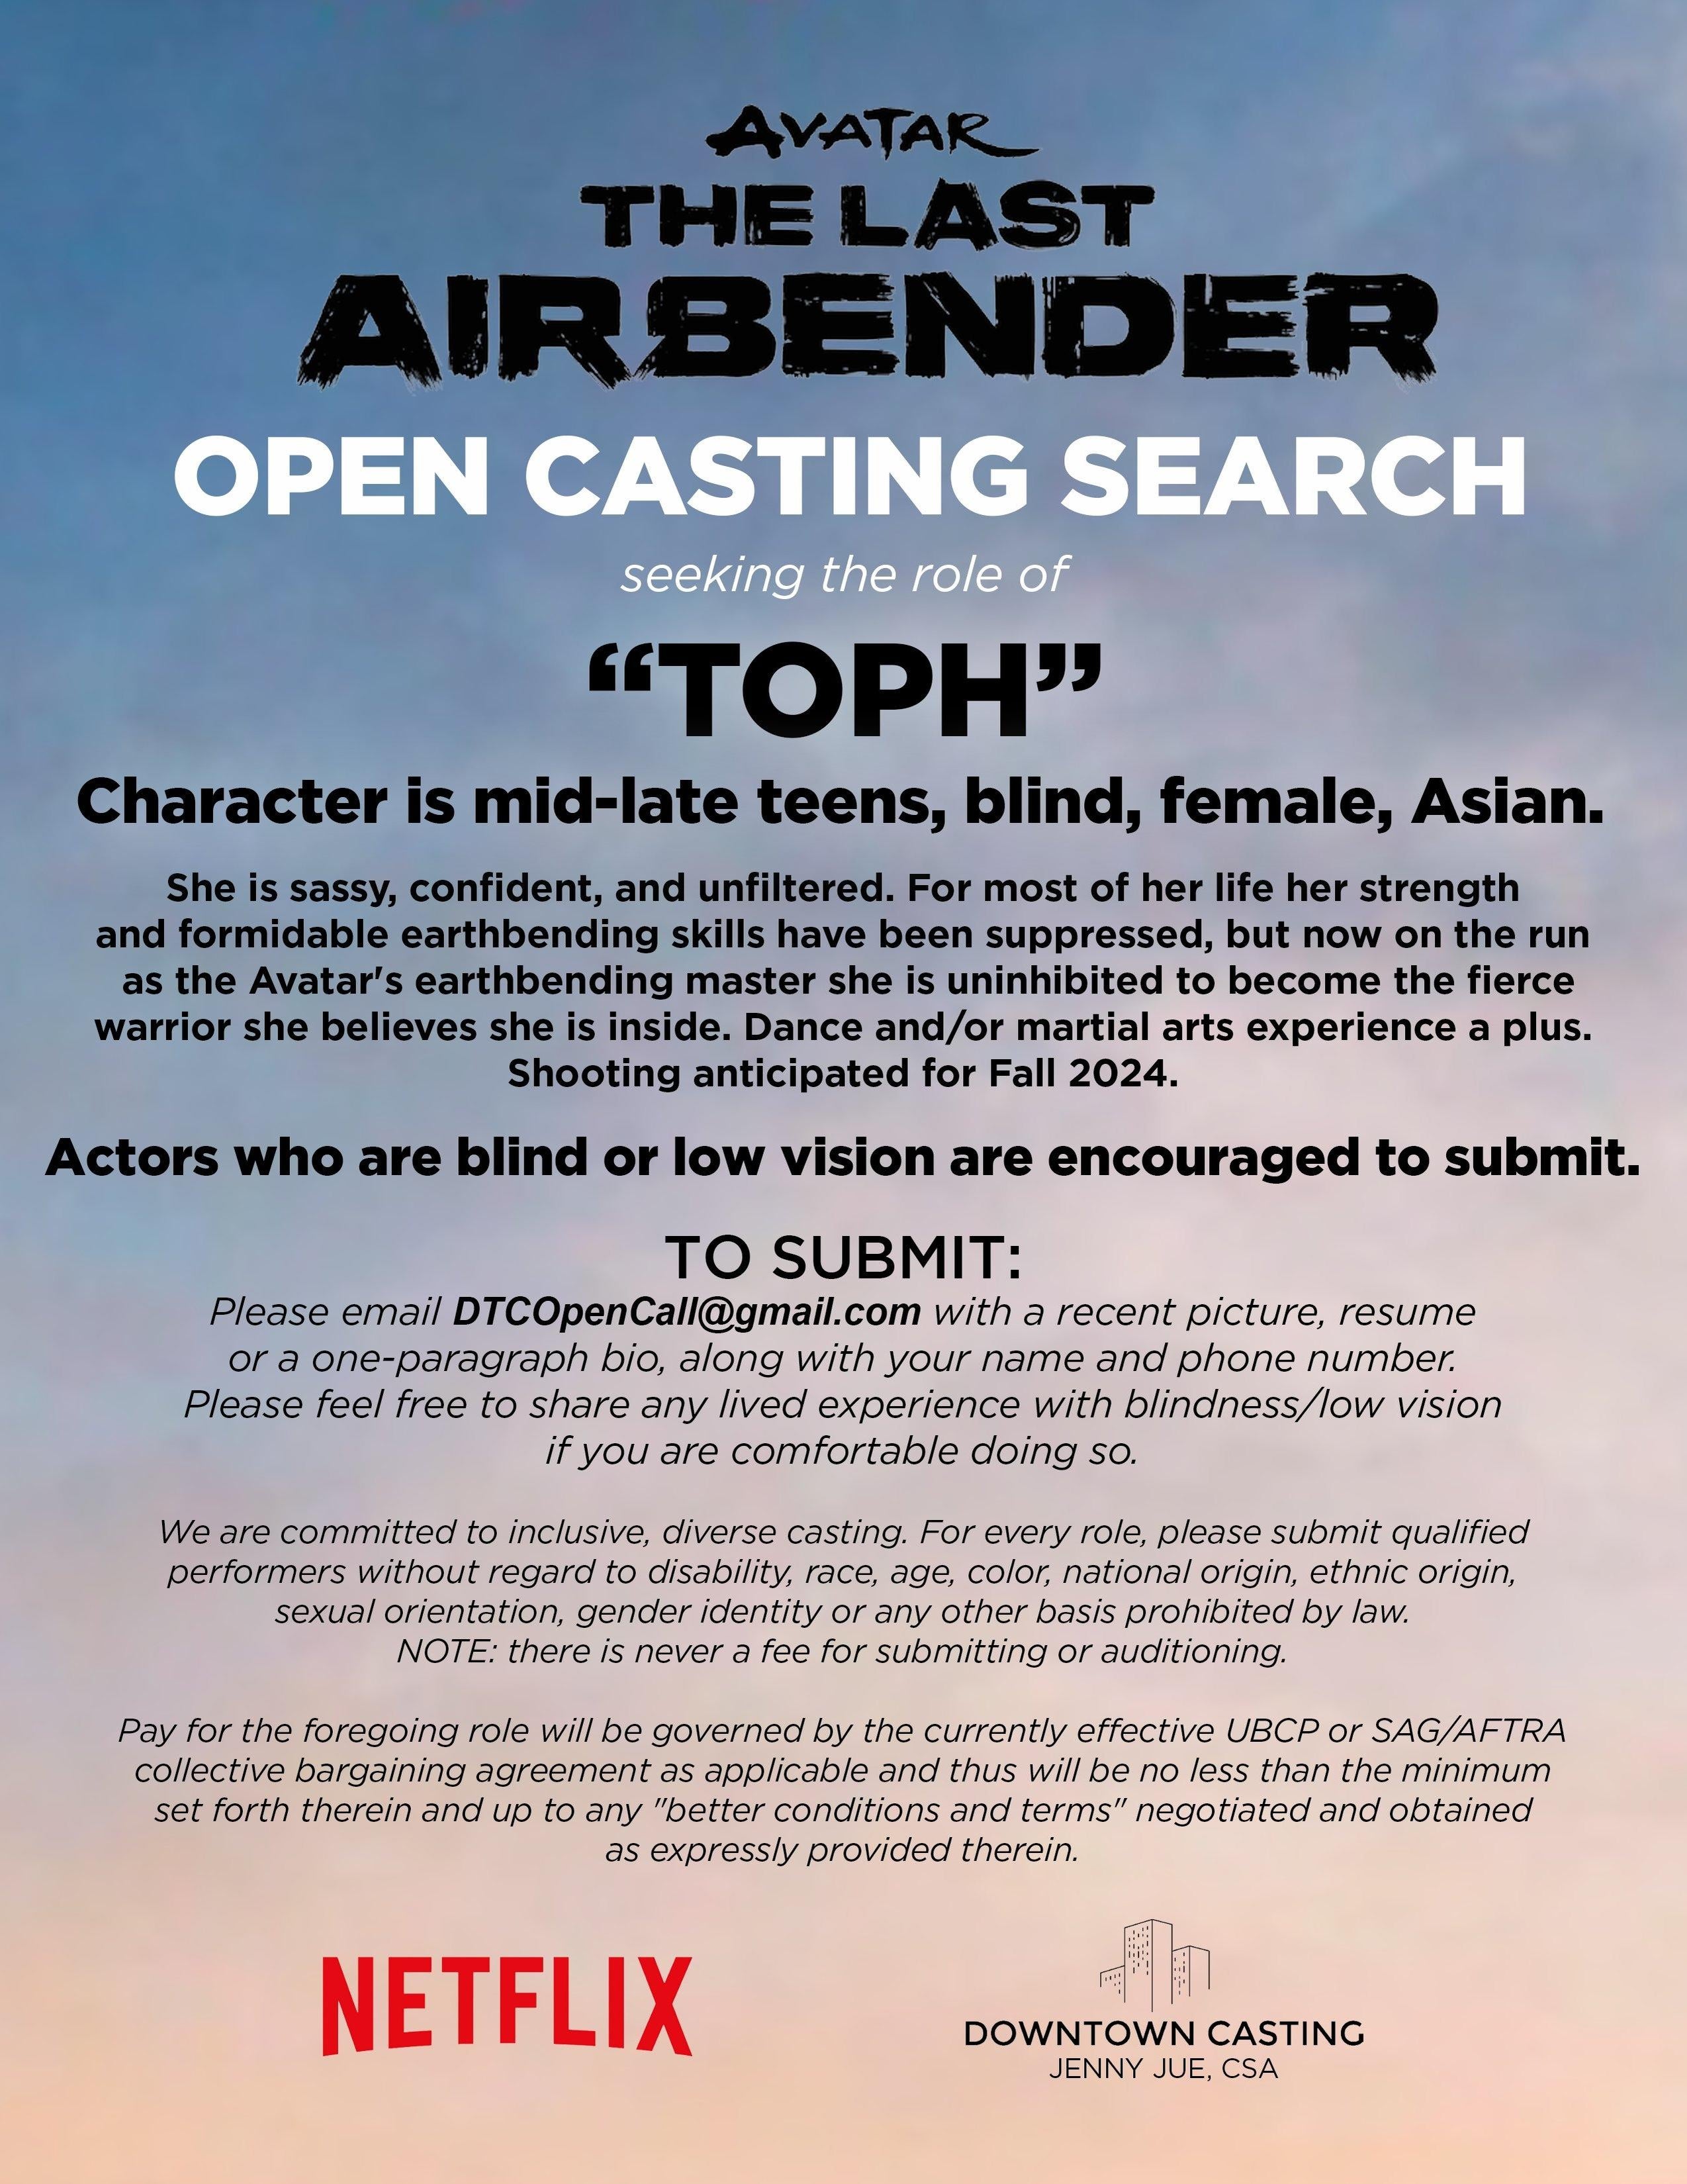 avatar-the-last-airbender-netflix-toph-casting-search.jpg